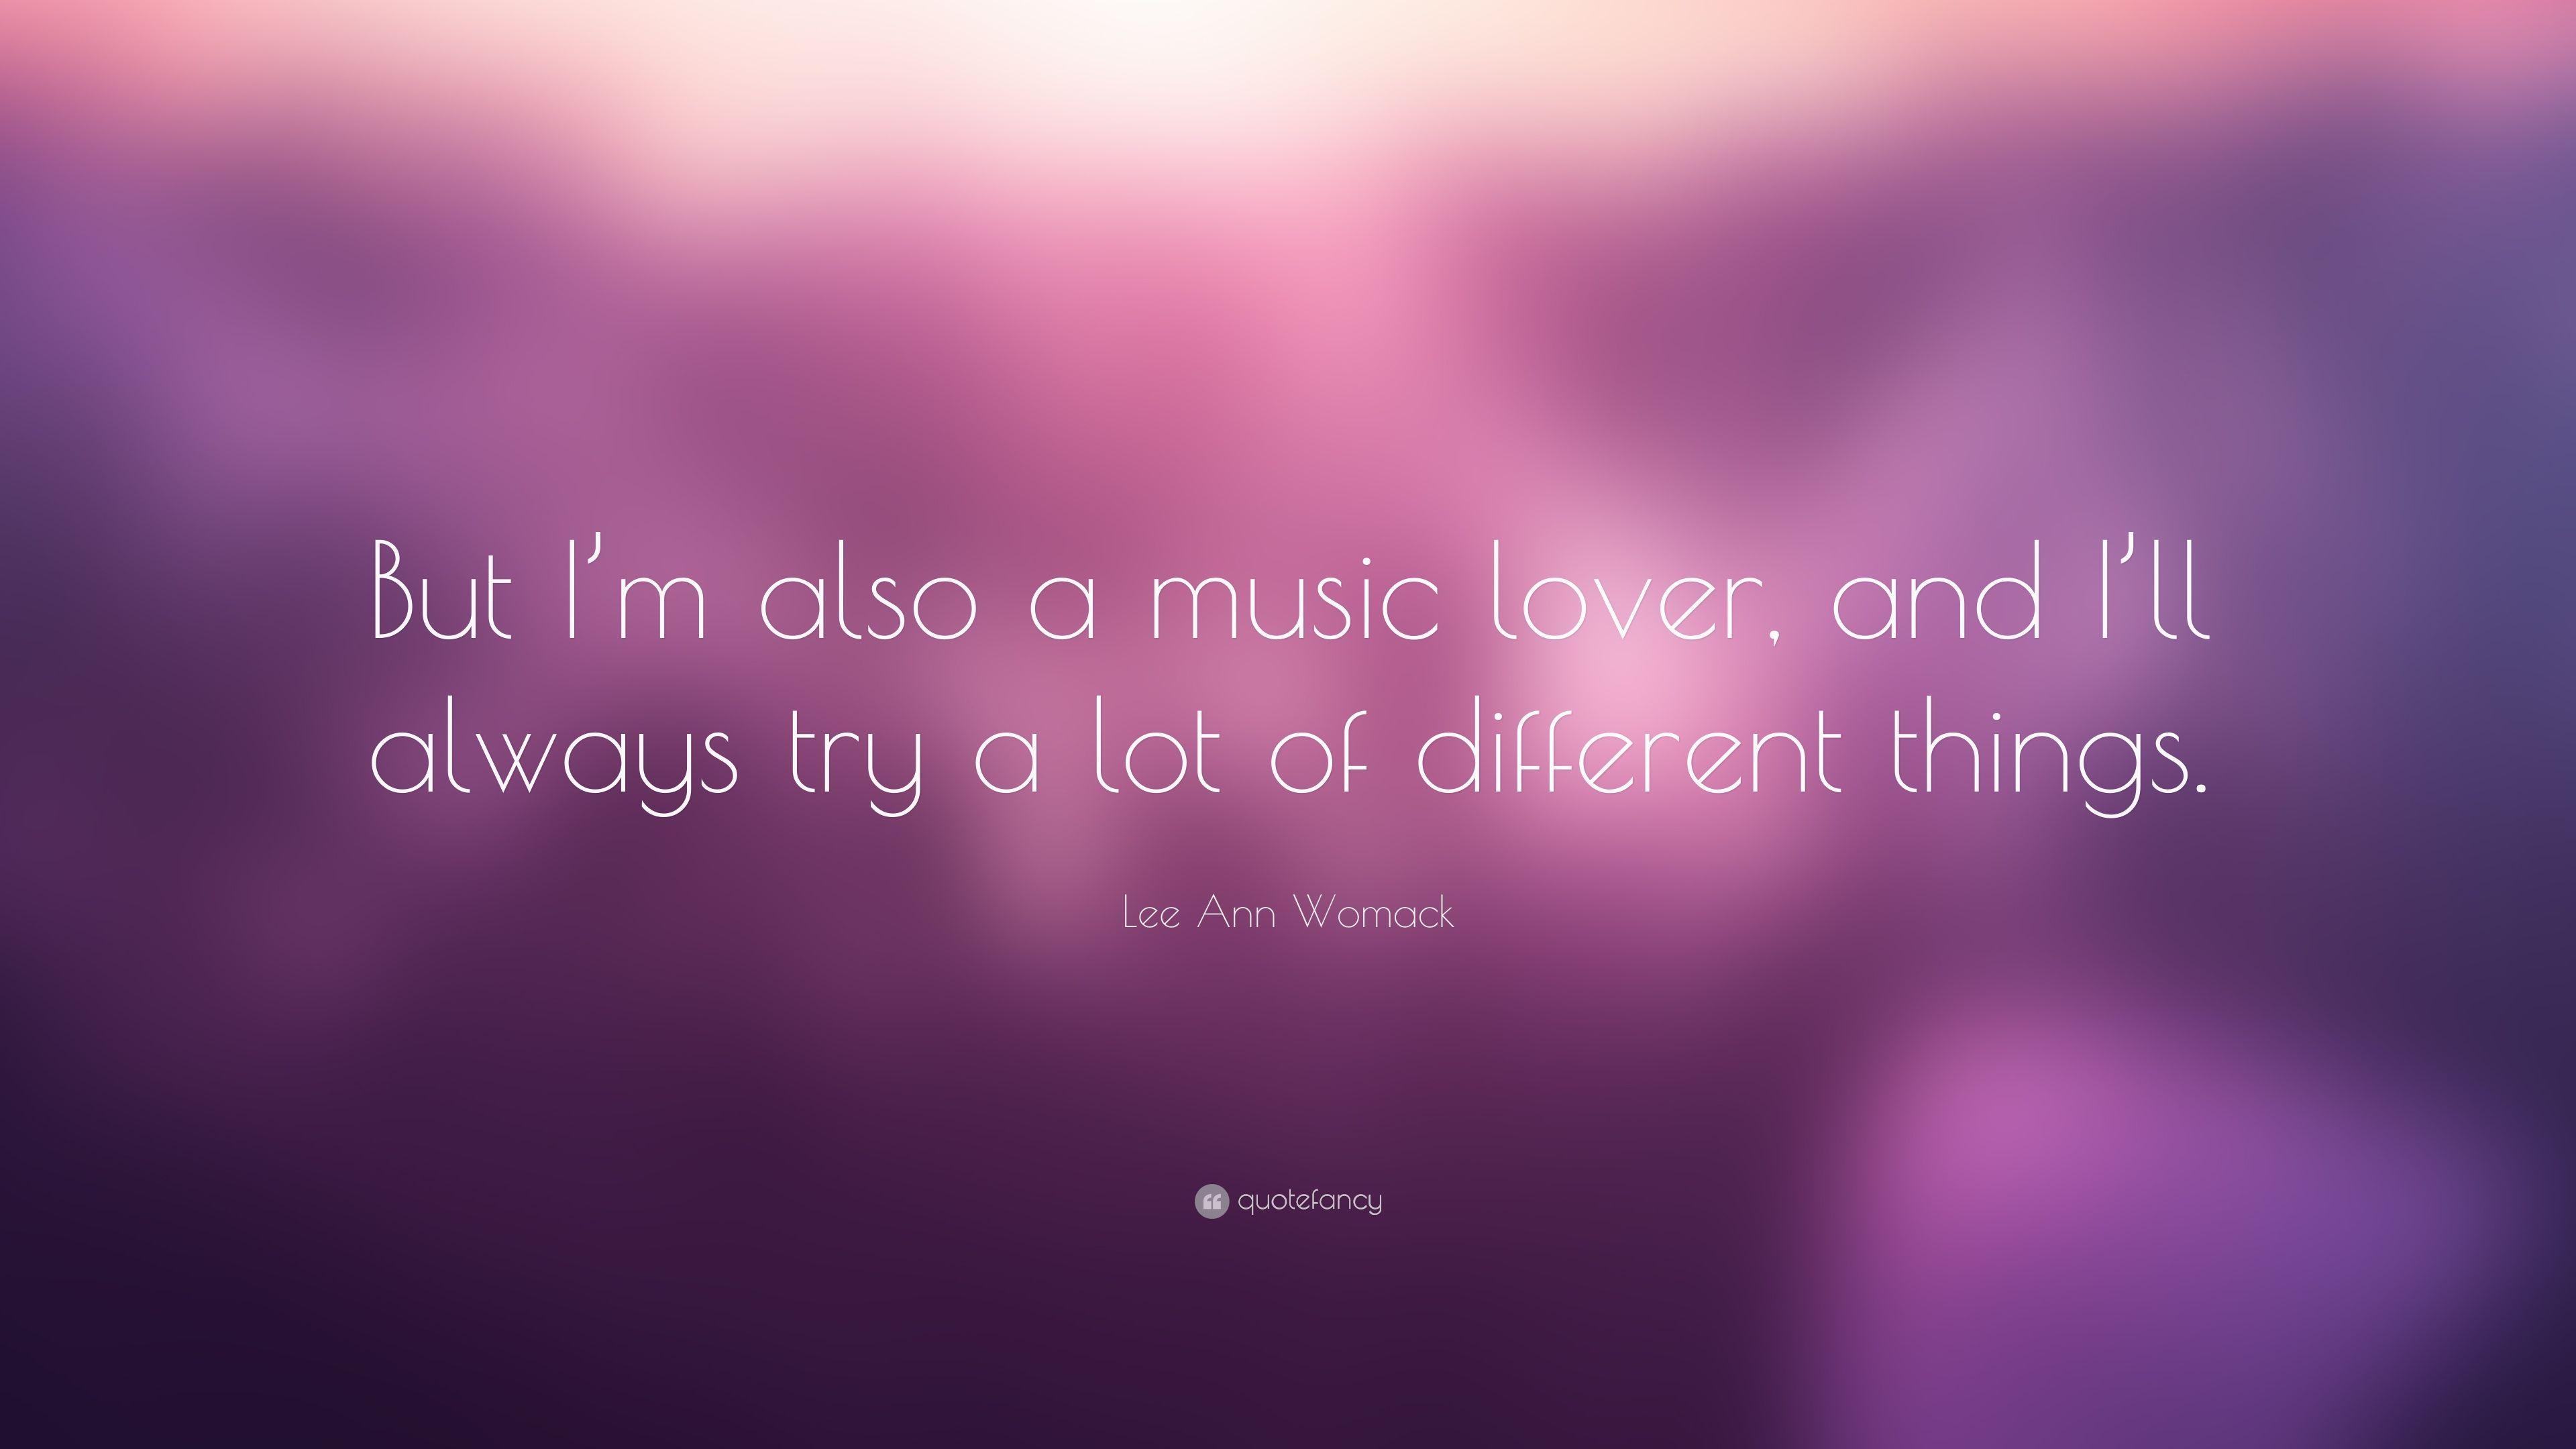 Lee Ann Womack Quote: “But I'm also a music lover, and I'll always